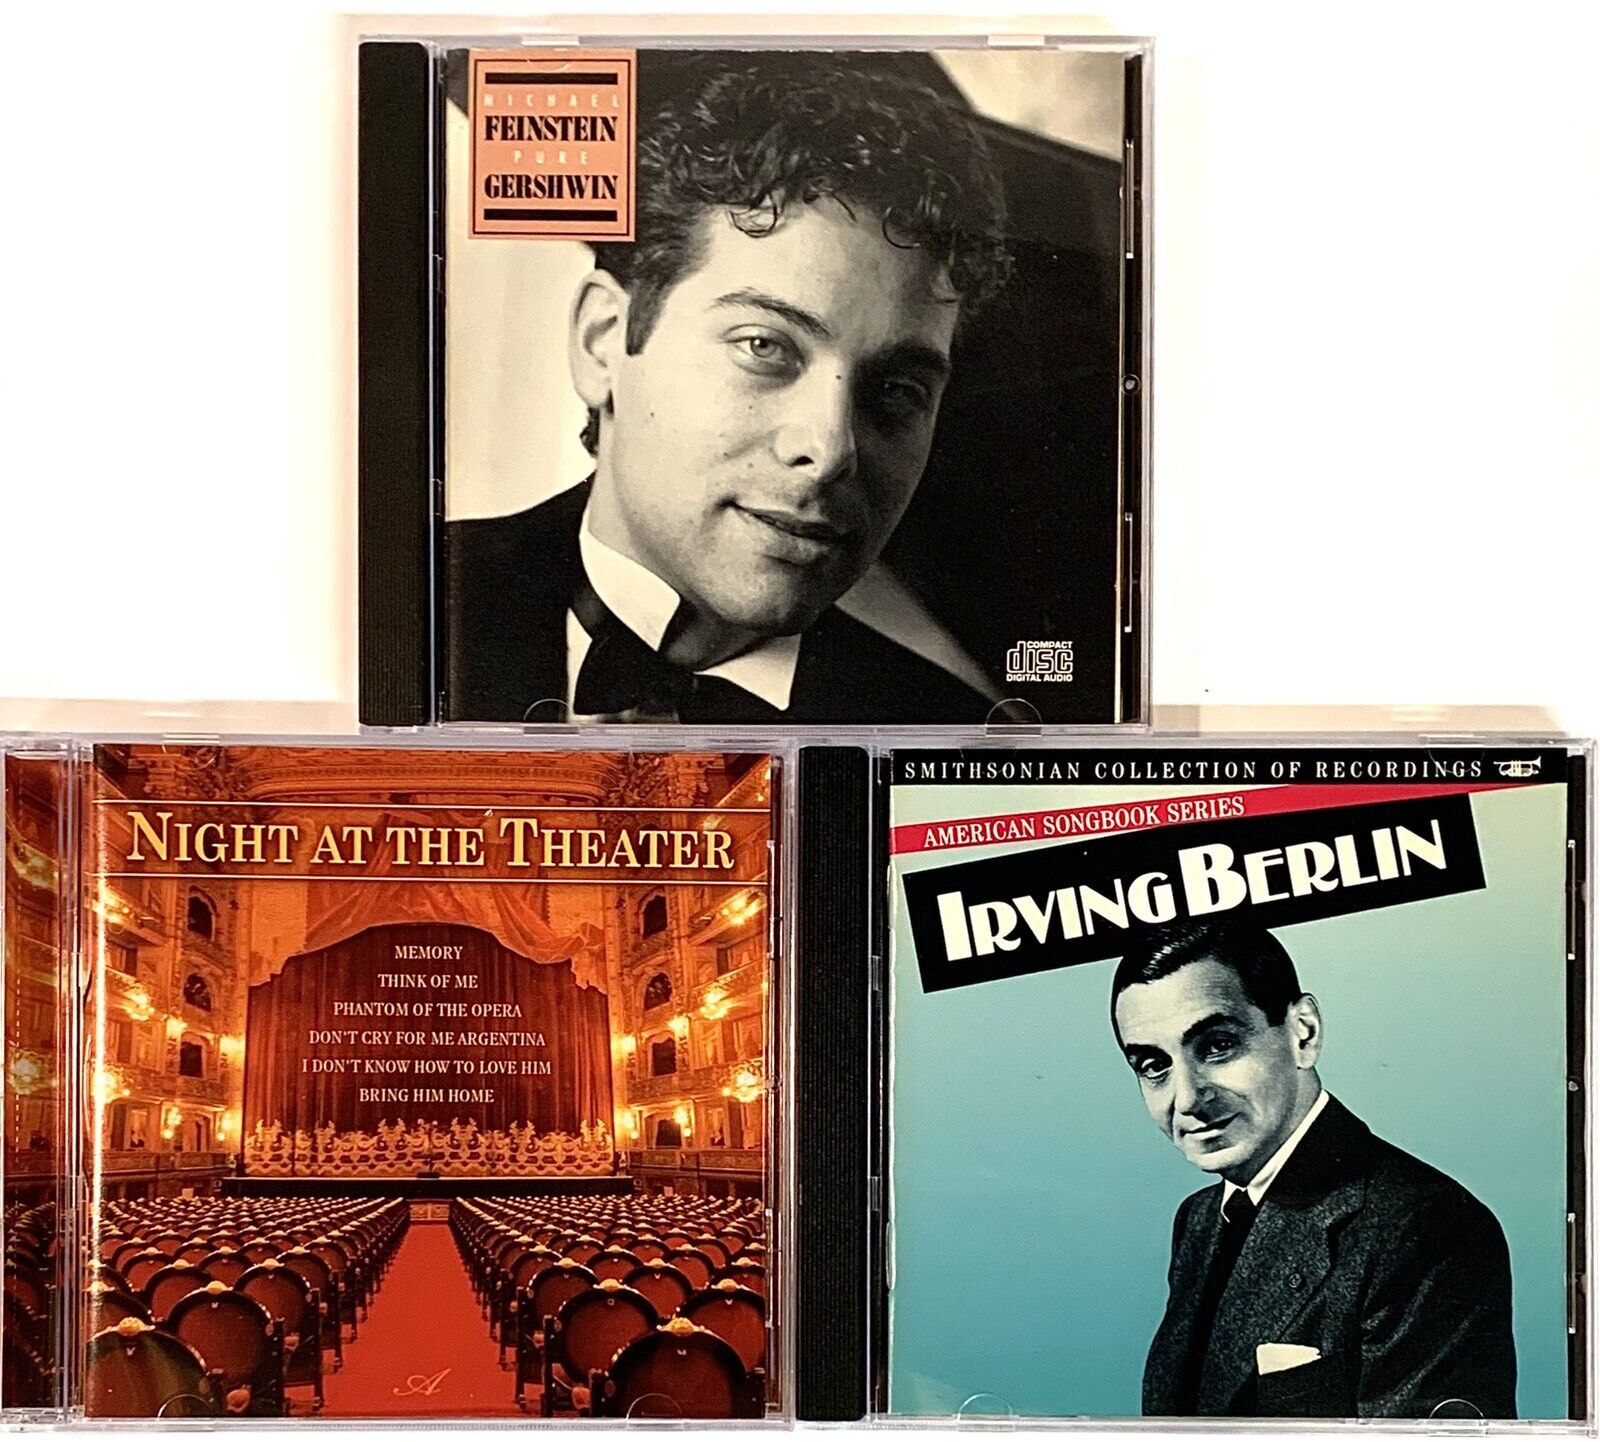 Musical Theater CD Lot 3 CDs George Gershwin • Irving Berlin • Night At Theater